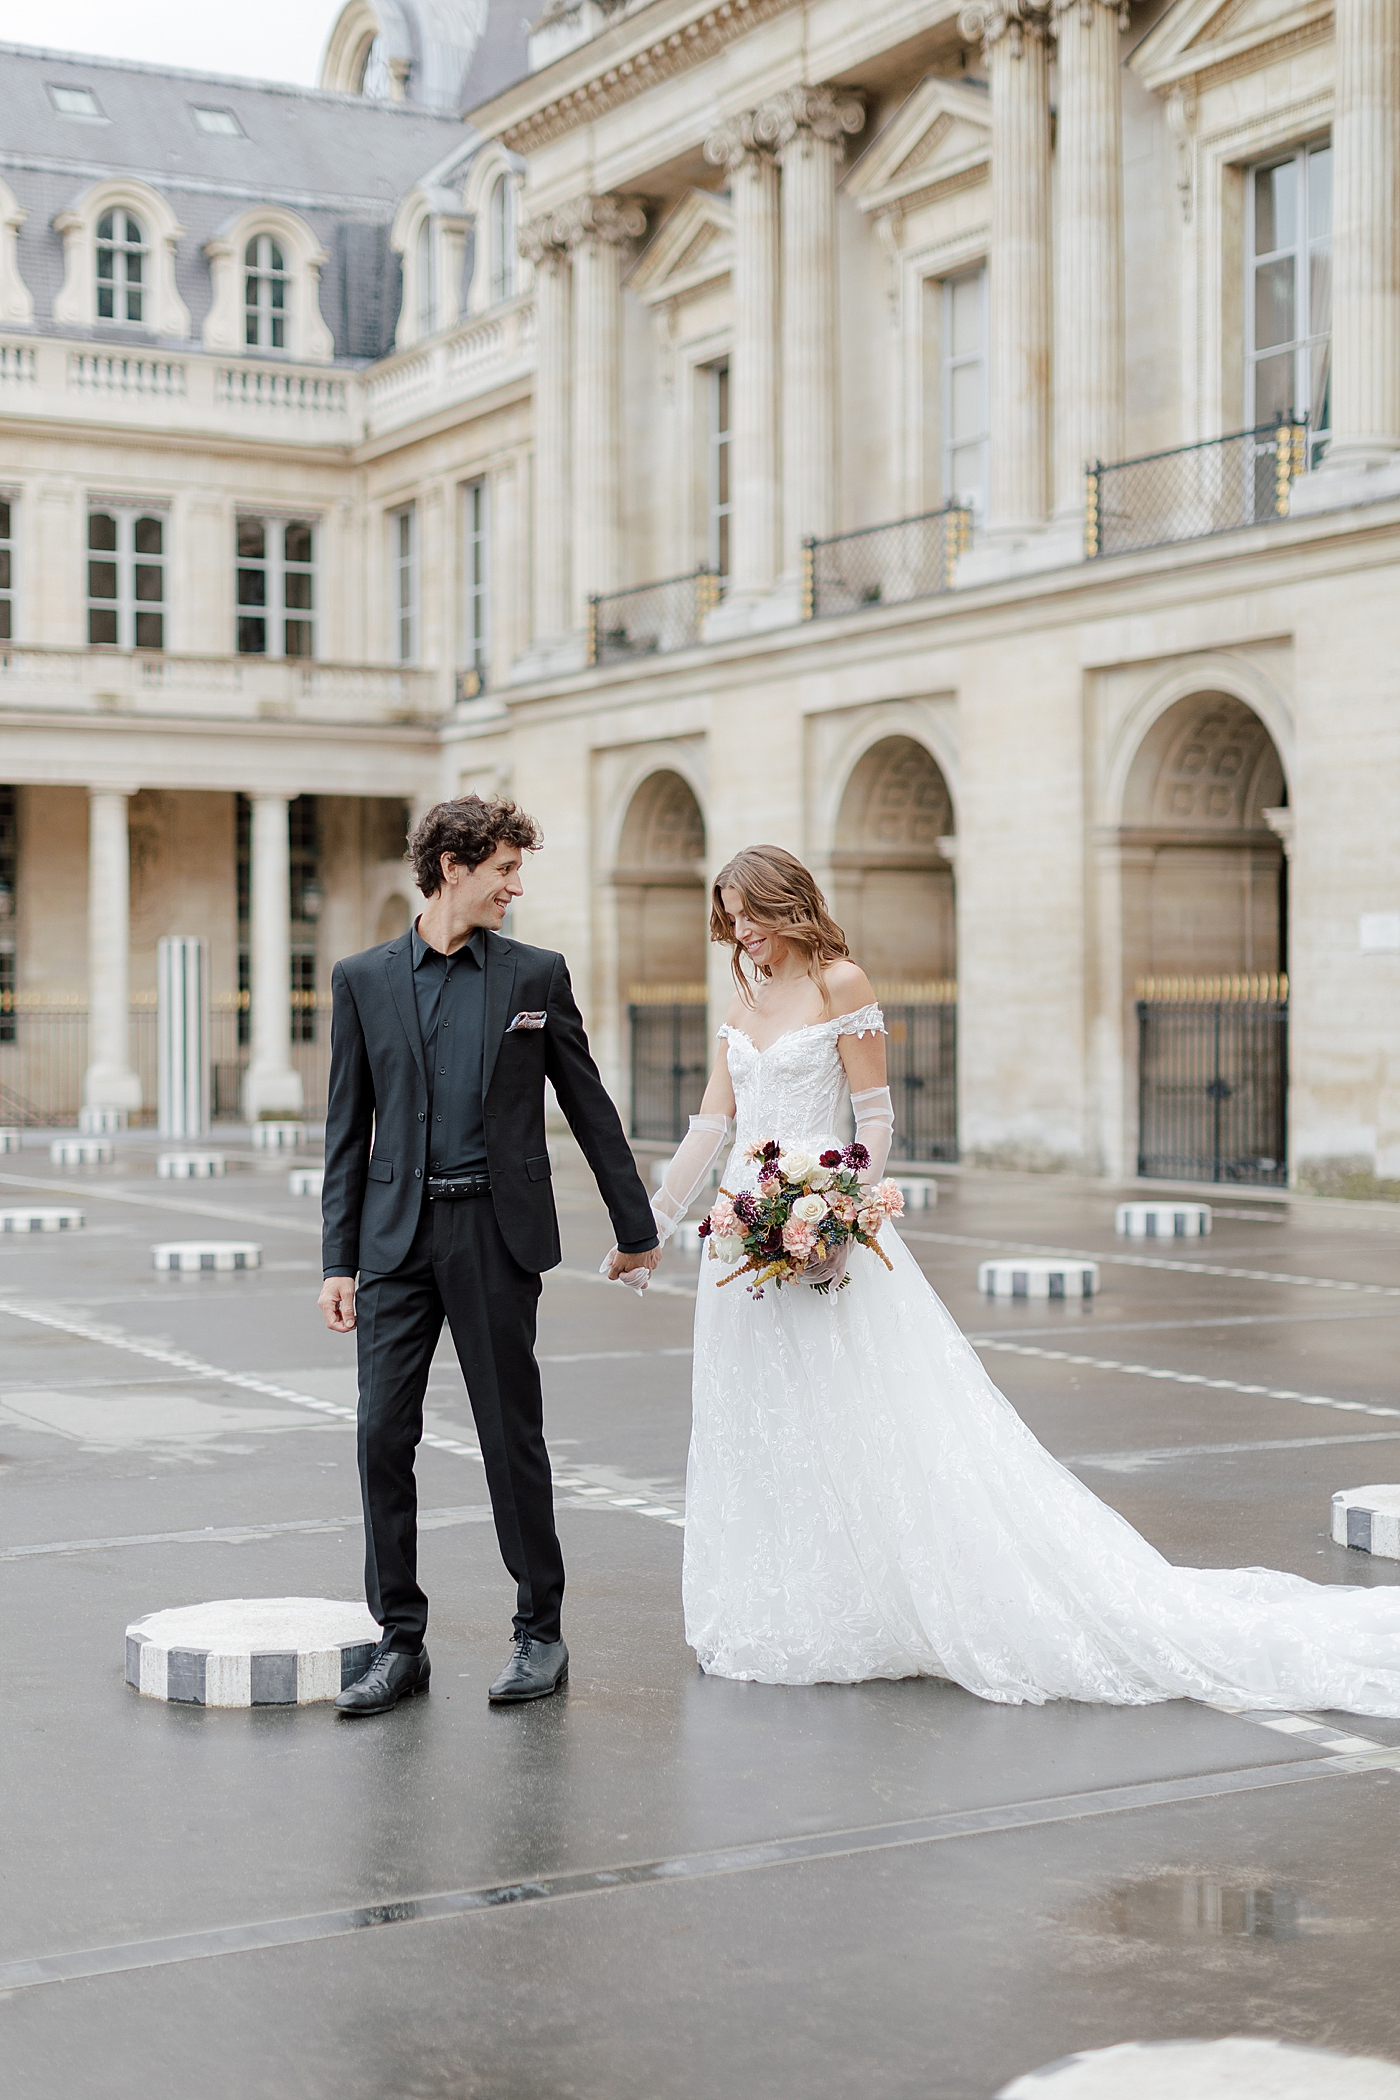 Bride and groom starting to walk while looking in different directions with a European chateau in the background | Image by Hope Helmuth Photography